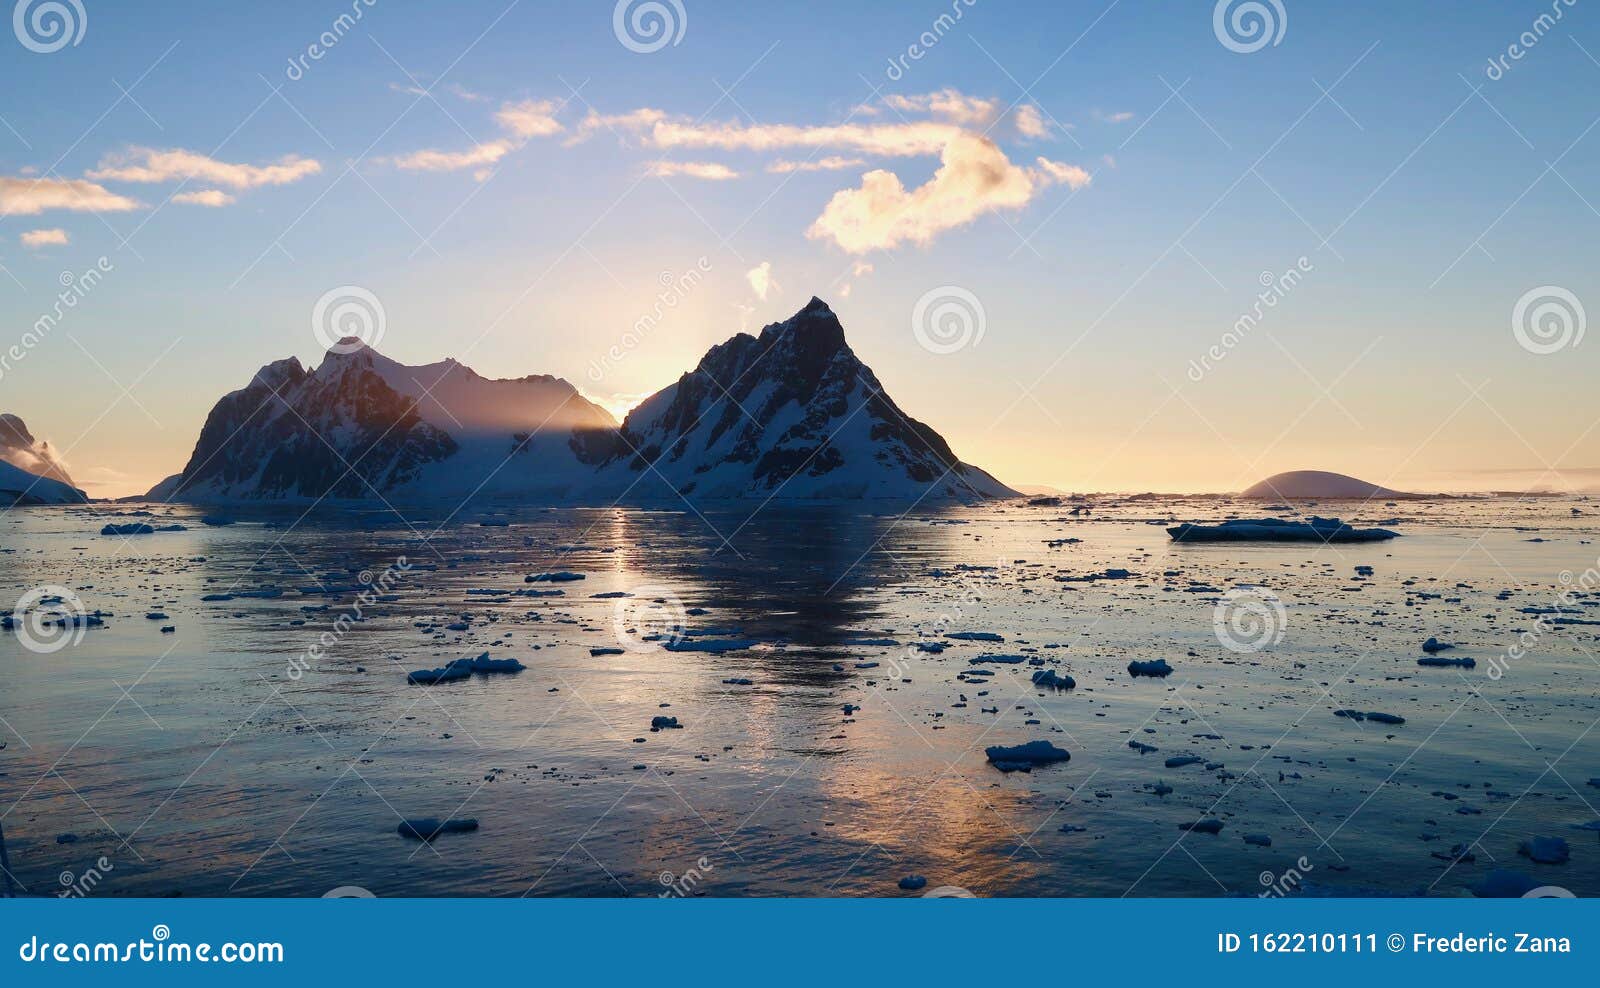 sunset at the entrance of the lemaire channel in antarctica.